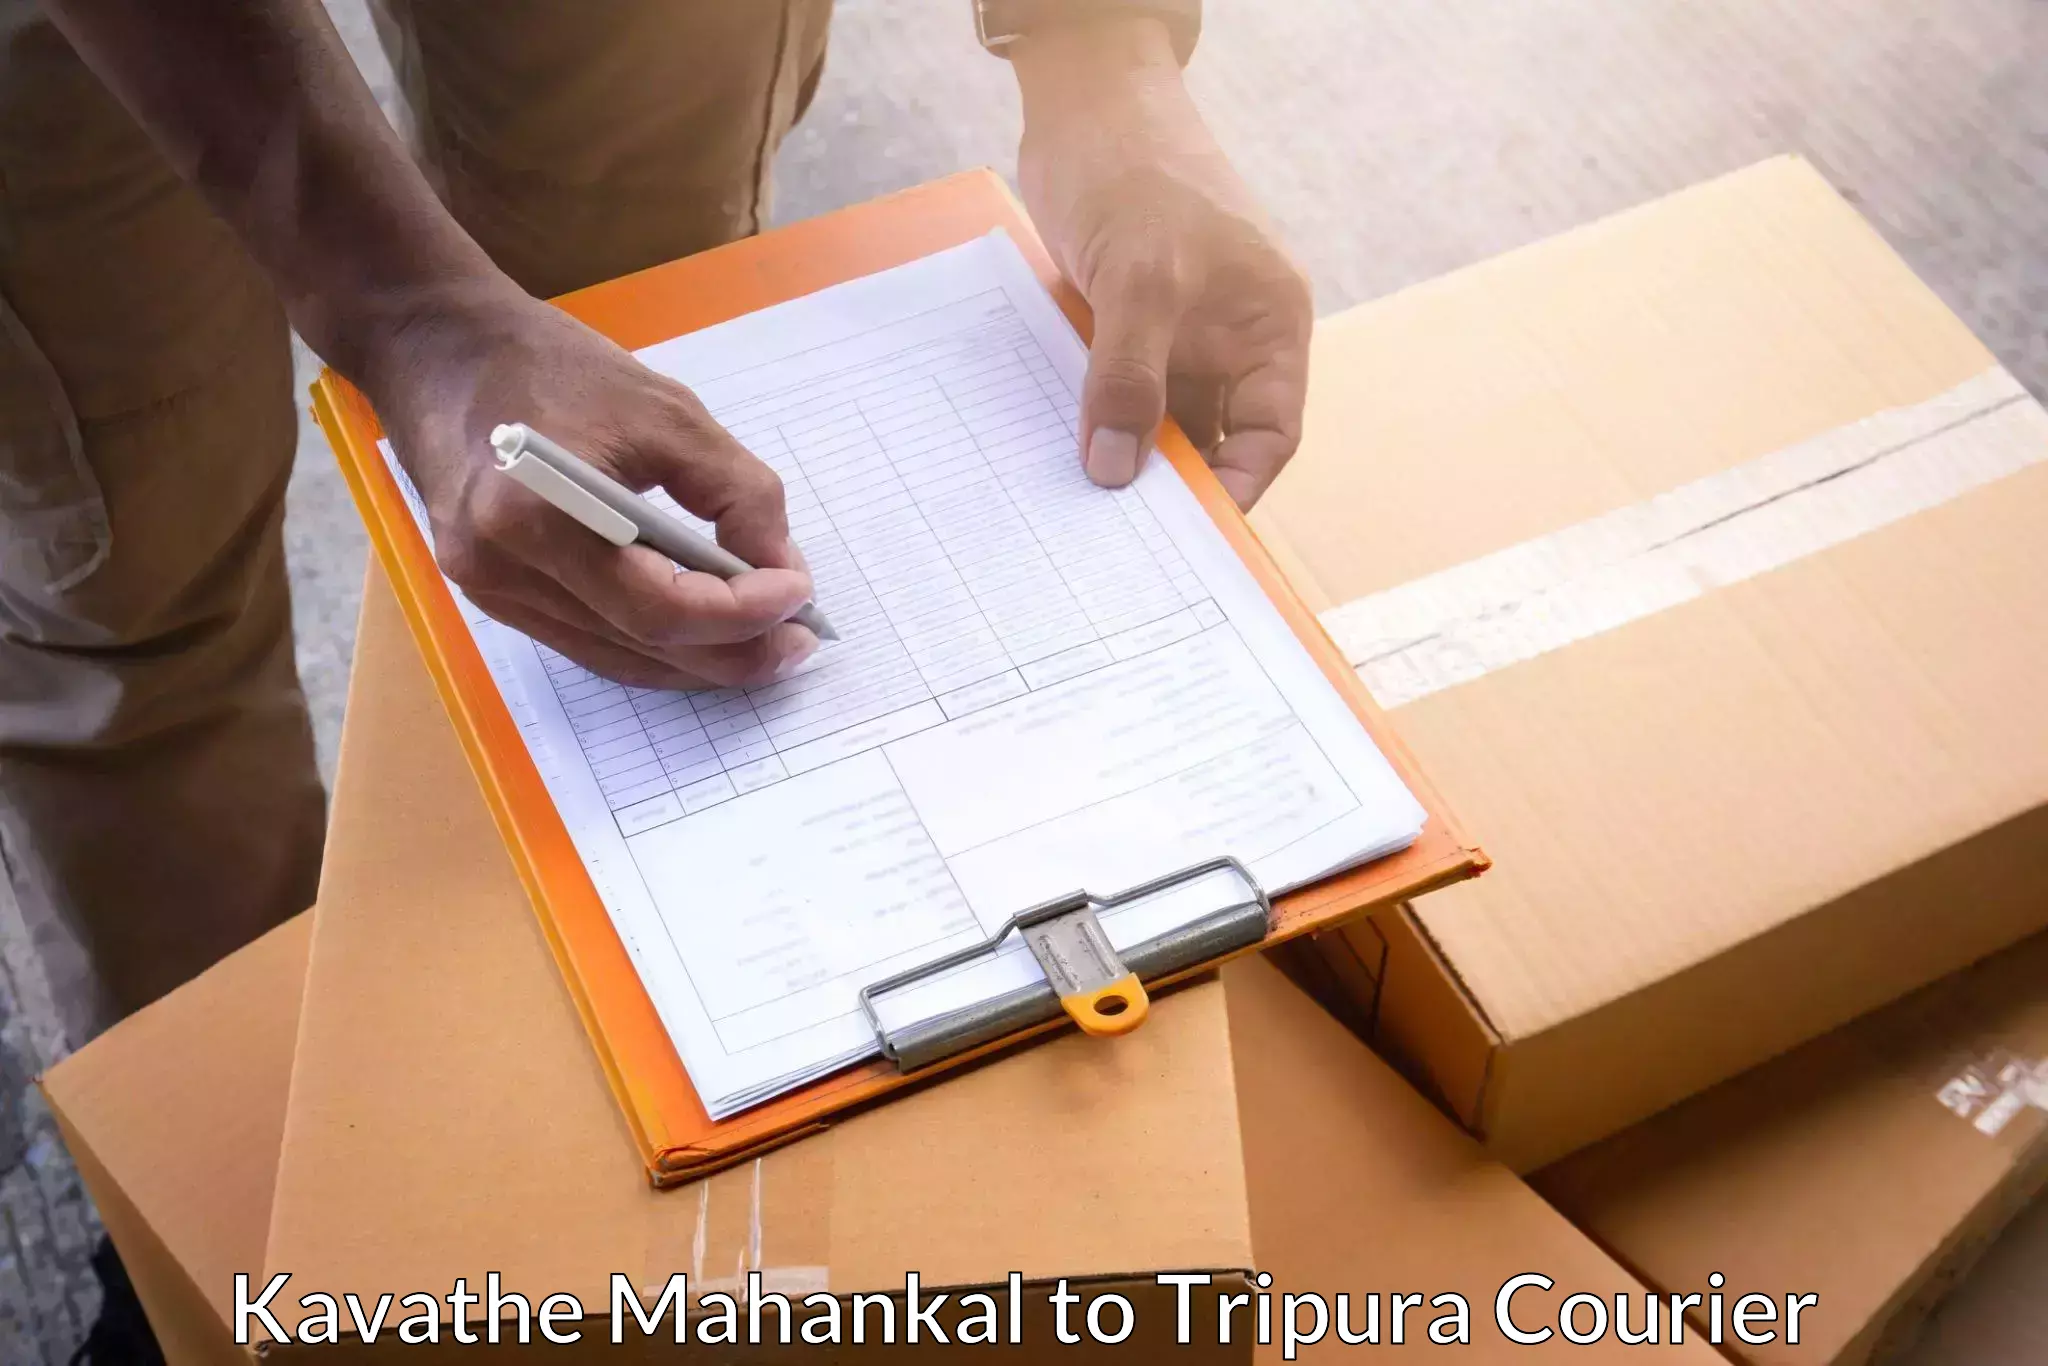 Professional courier handling in Kavathe Mahankal to Kailashahar